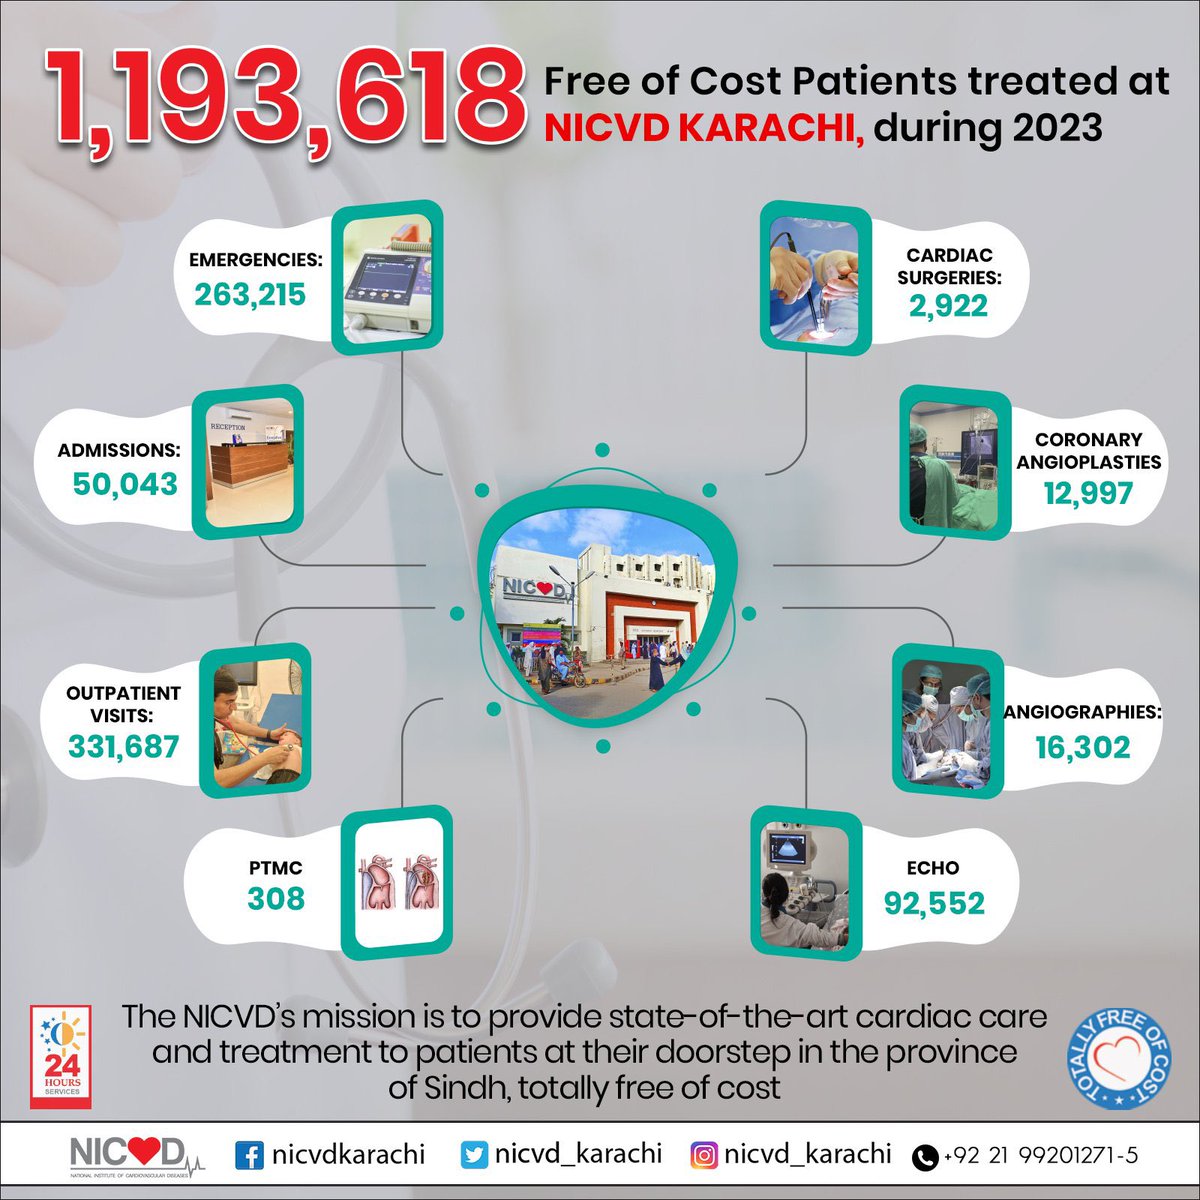 In 2023, NICVD Karachi served the heart health of the community by providing free treatment to 1,193,618 patients. We’re here for every heart.❤️
#NICVD #HealthcareForAll #FreeOfCost